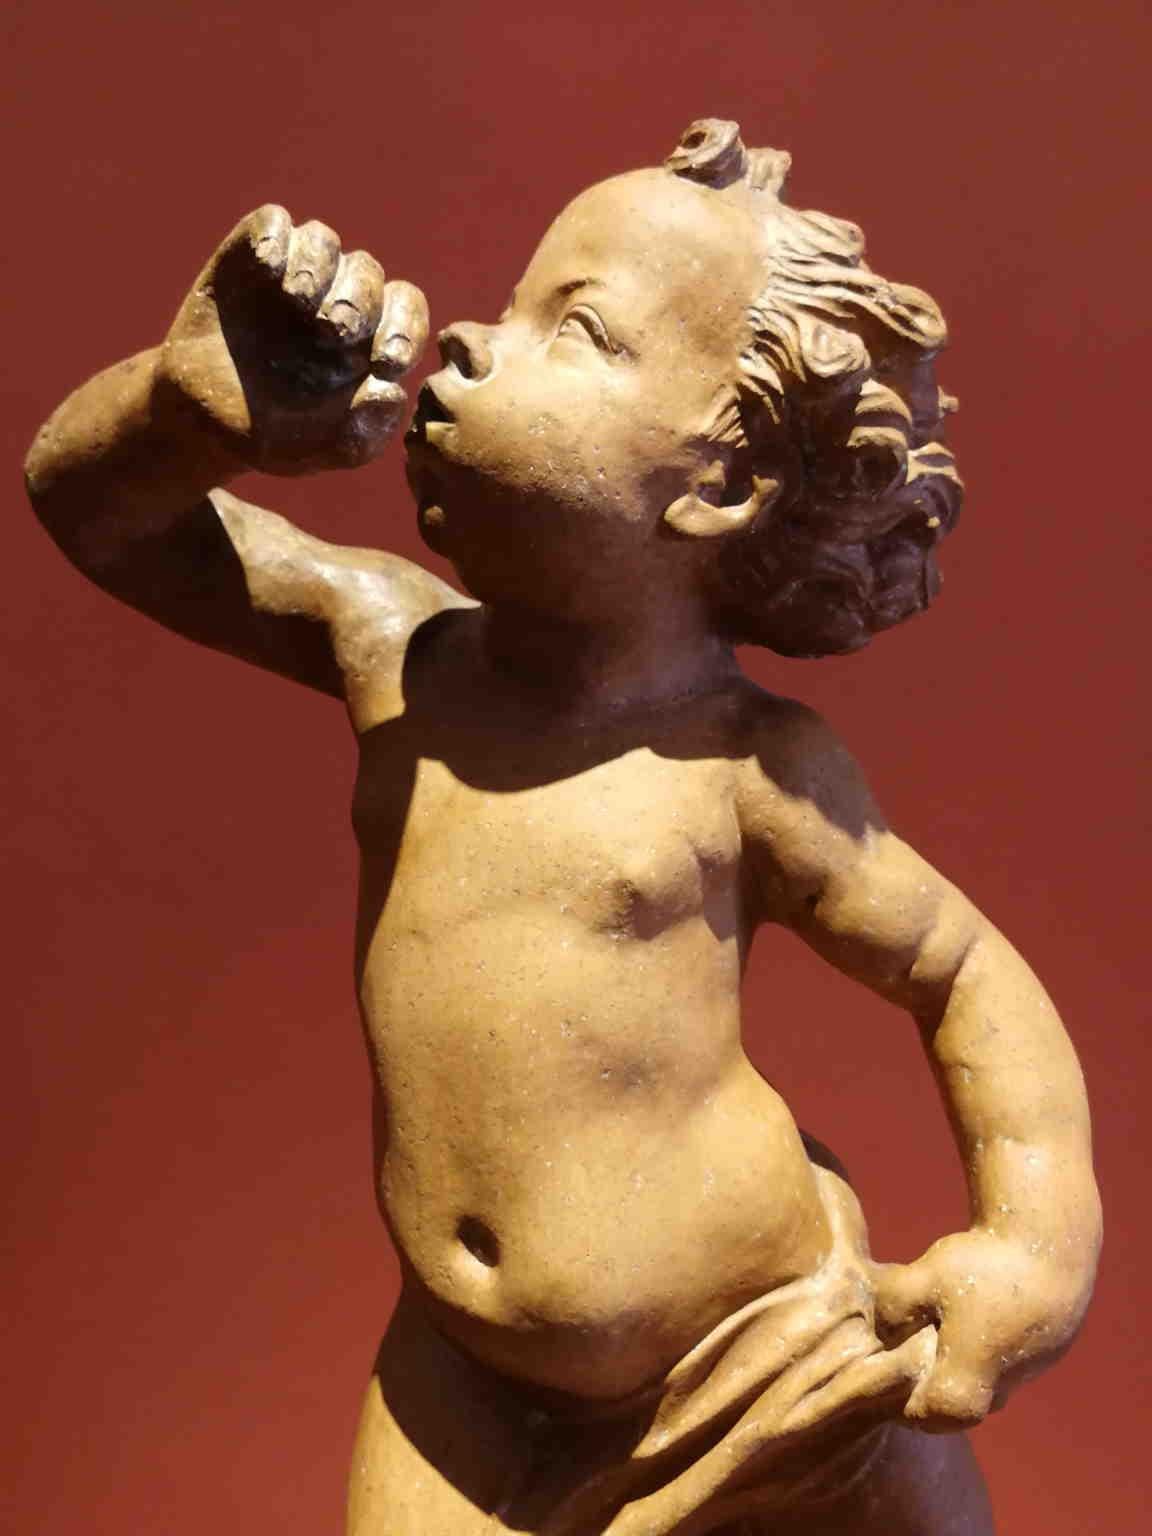 Terracotta statue representing a putto blowing with a cloth around his leg. It's inspired by the putto with dolphin by Andrea del Verrocchio, made for a fountain in Palazzo Vecchio (Florence). Considering the position, the typology of the objetc and